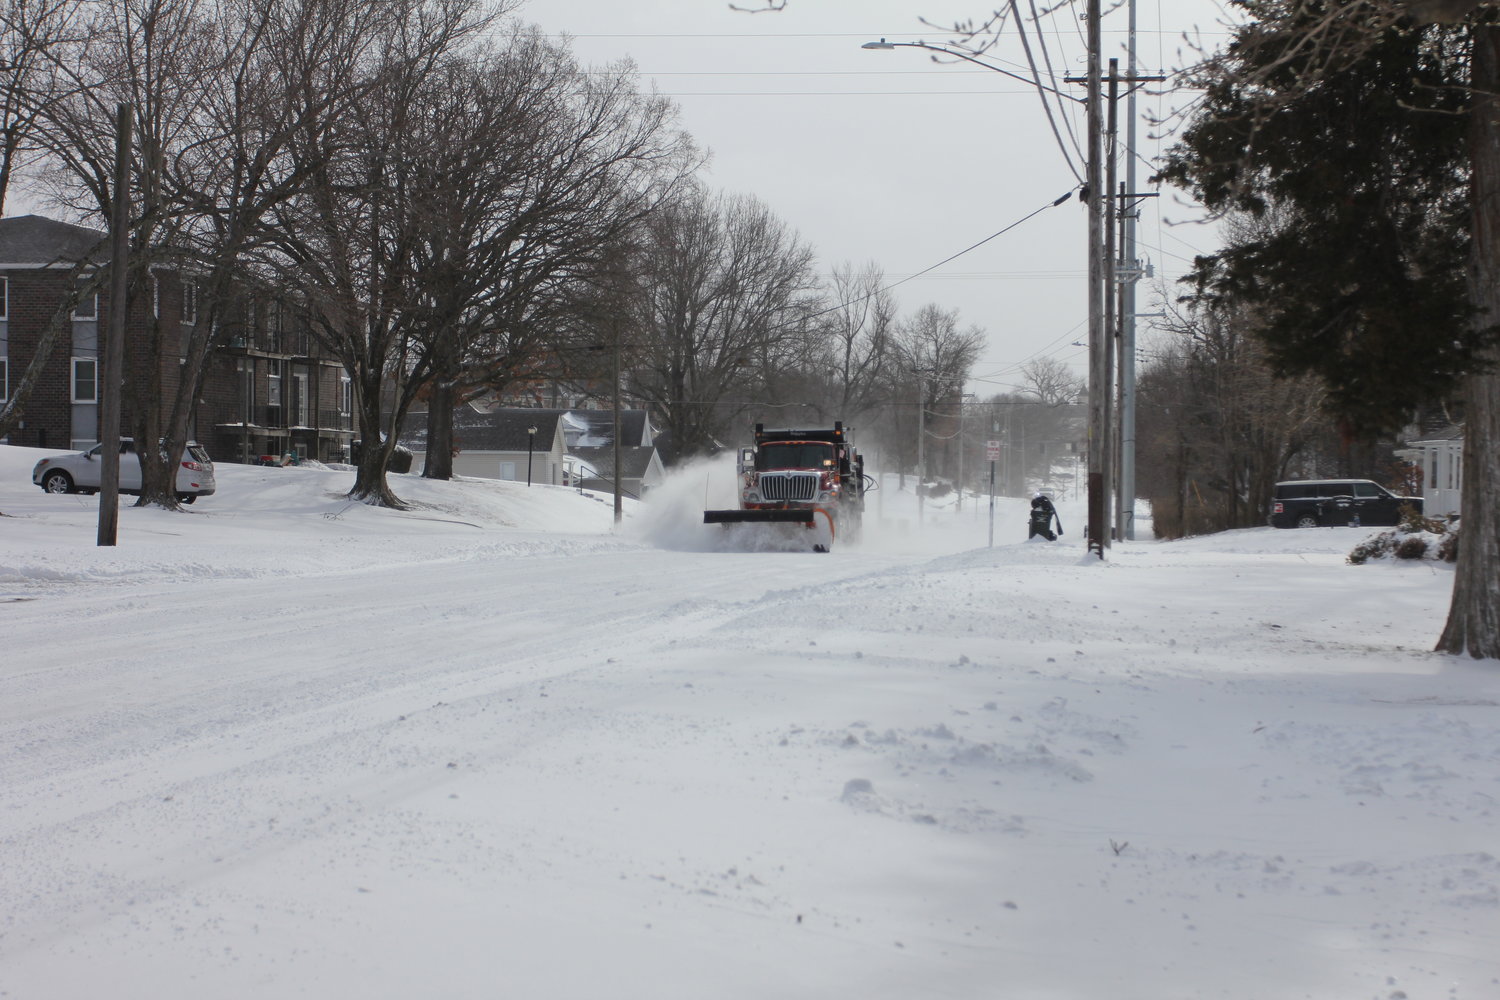 A snow plow clears the emergency snow route on Wednesday, Feb. 2, on North Holden Street in Warrensburg.